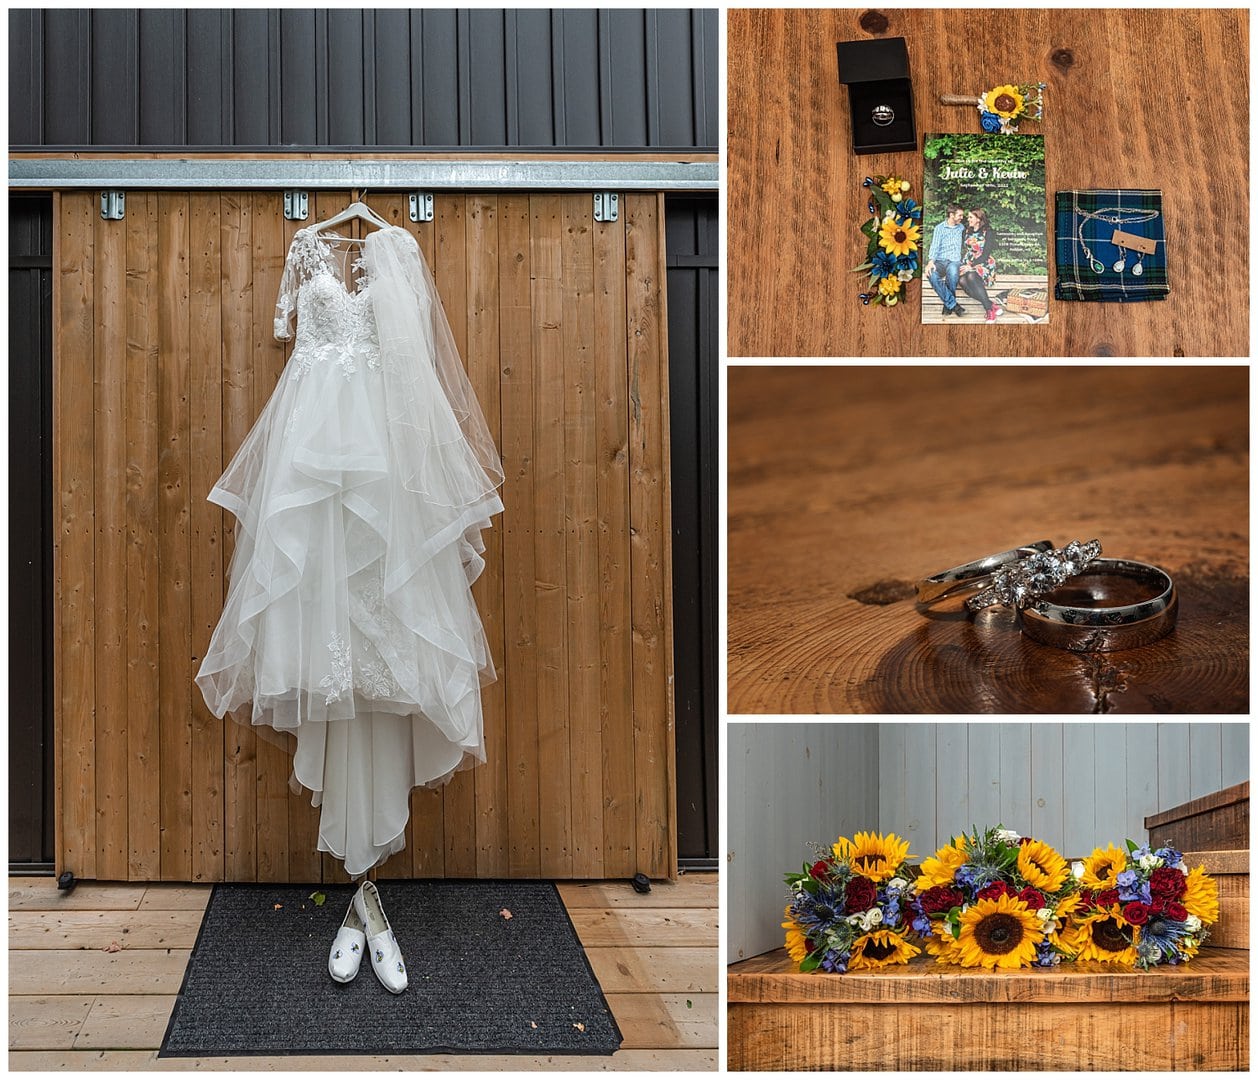 The wedding dress, invitation, sunflower bouquet and rings.